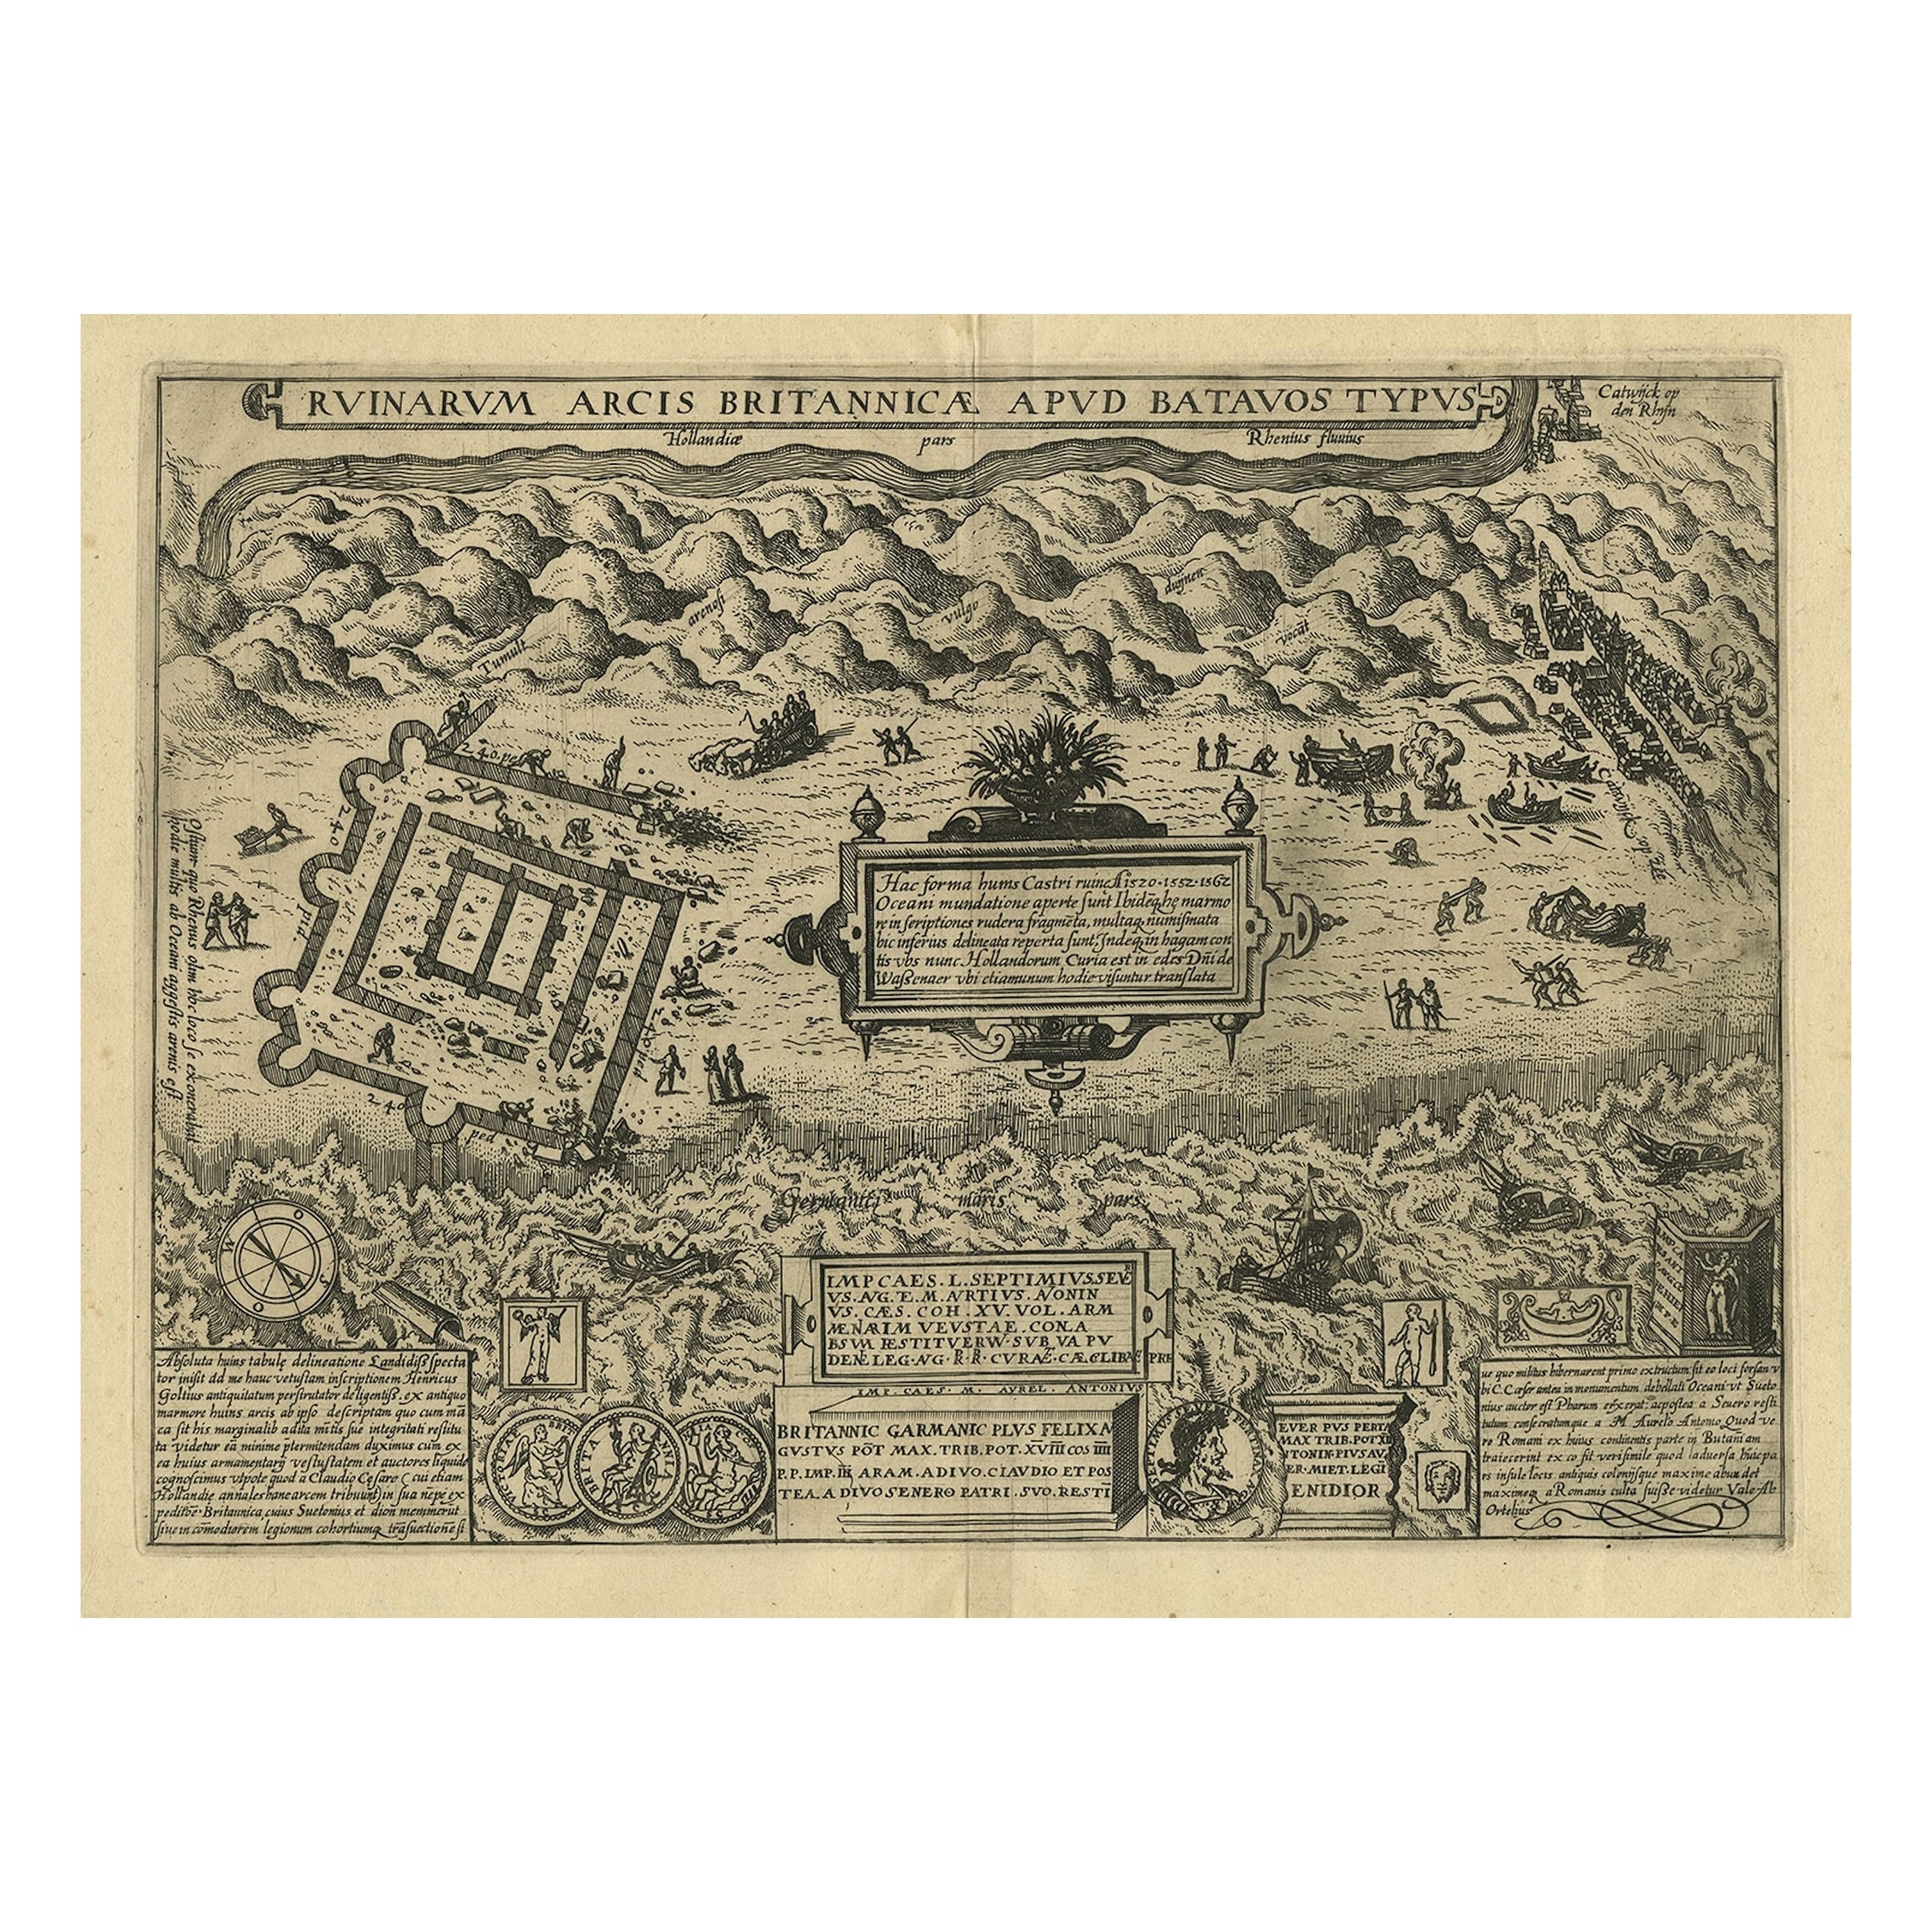 Antique Print of Fort Brittenburg by Guiccardini, 1612